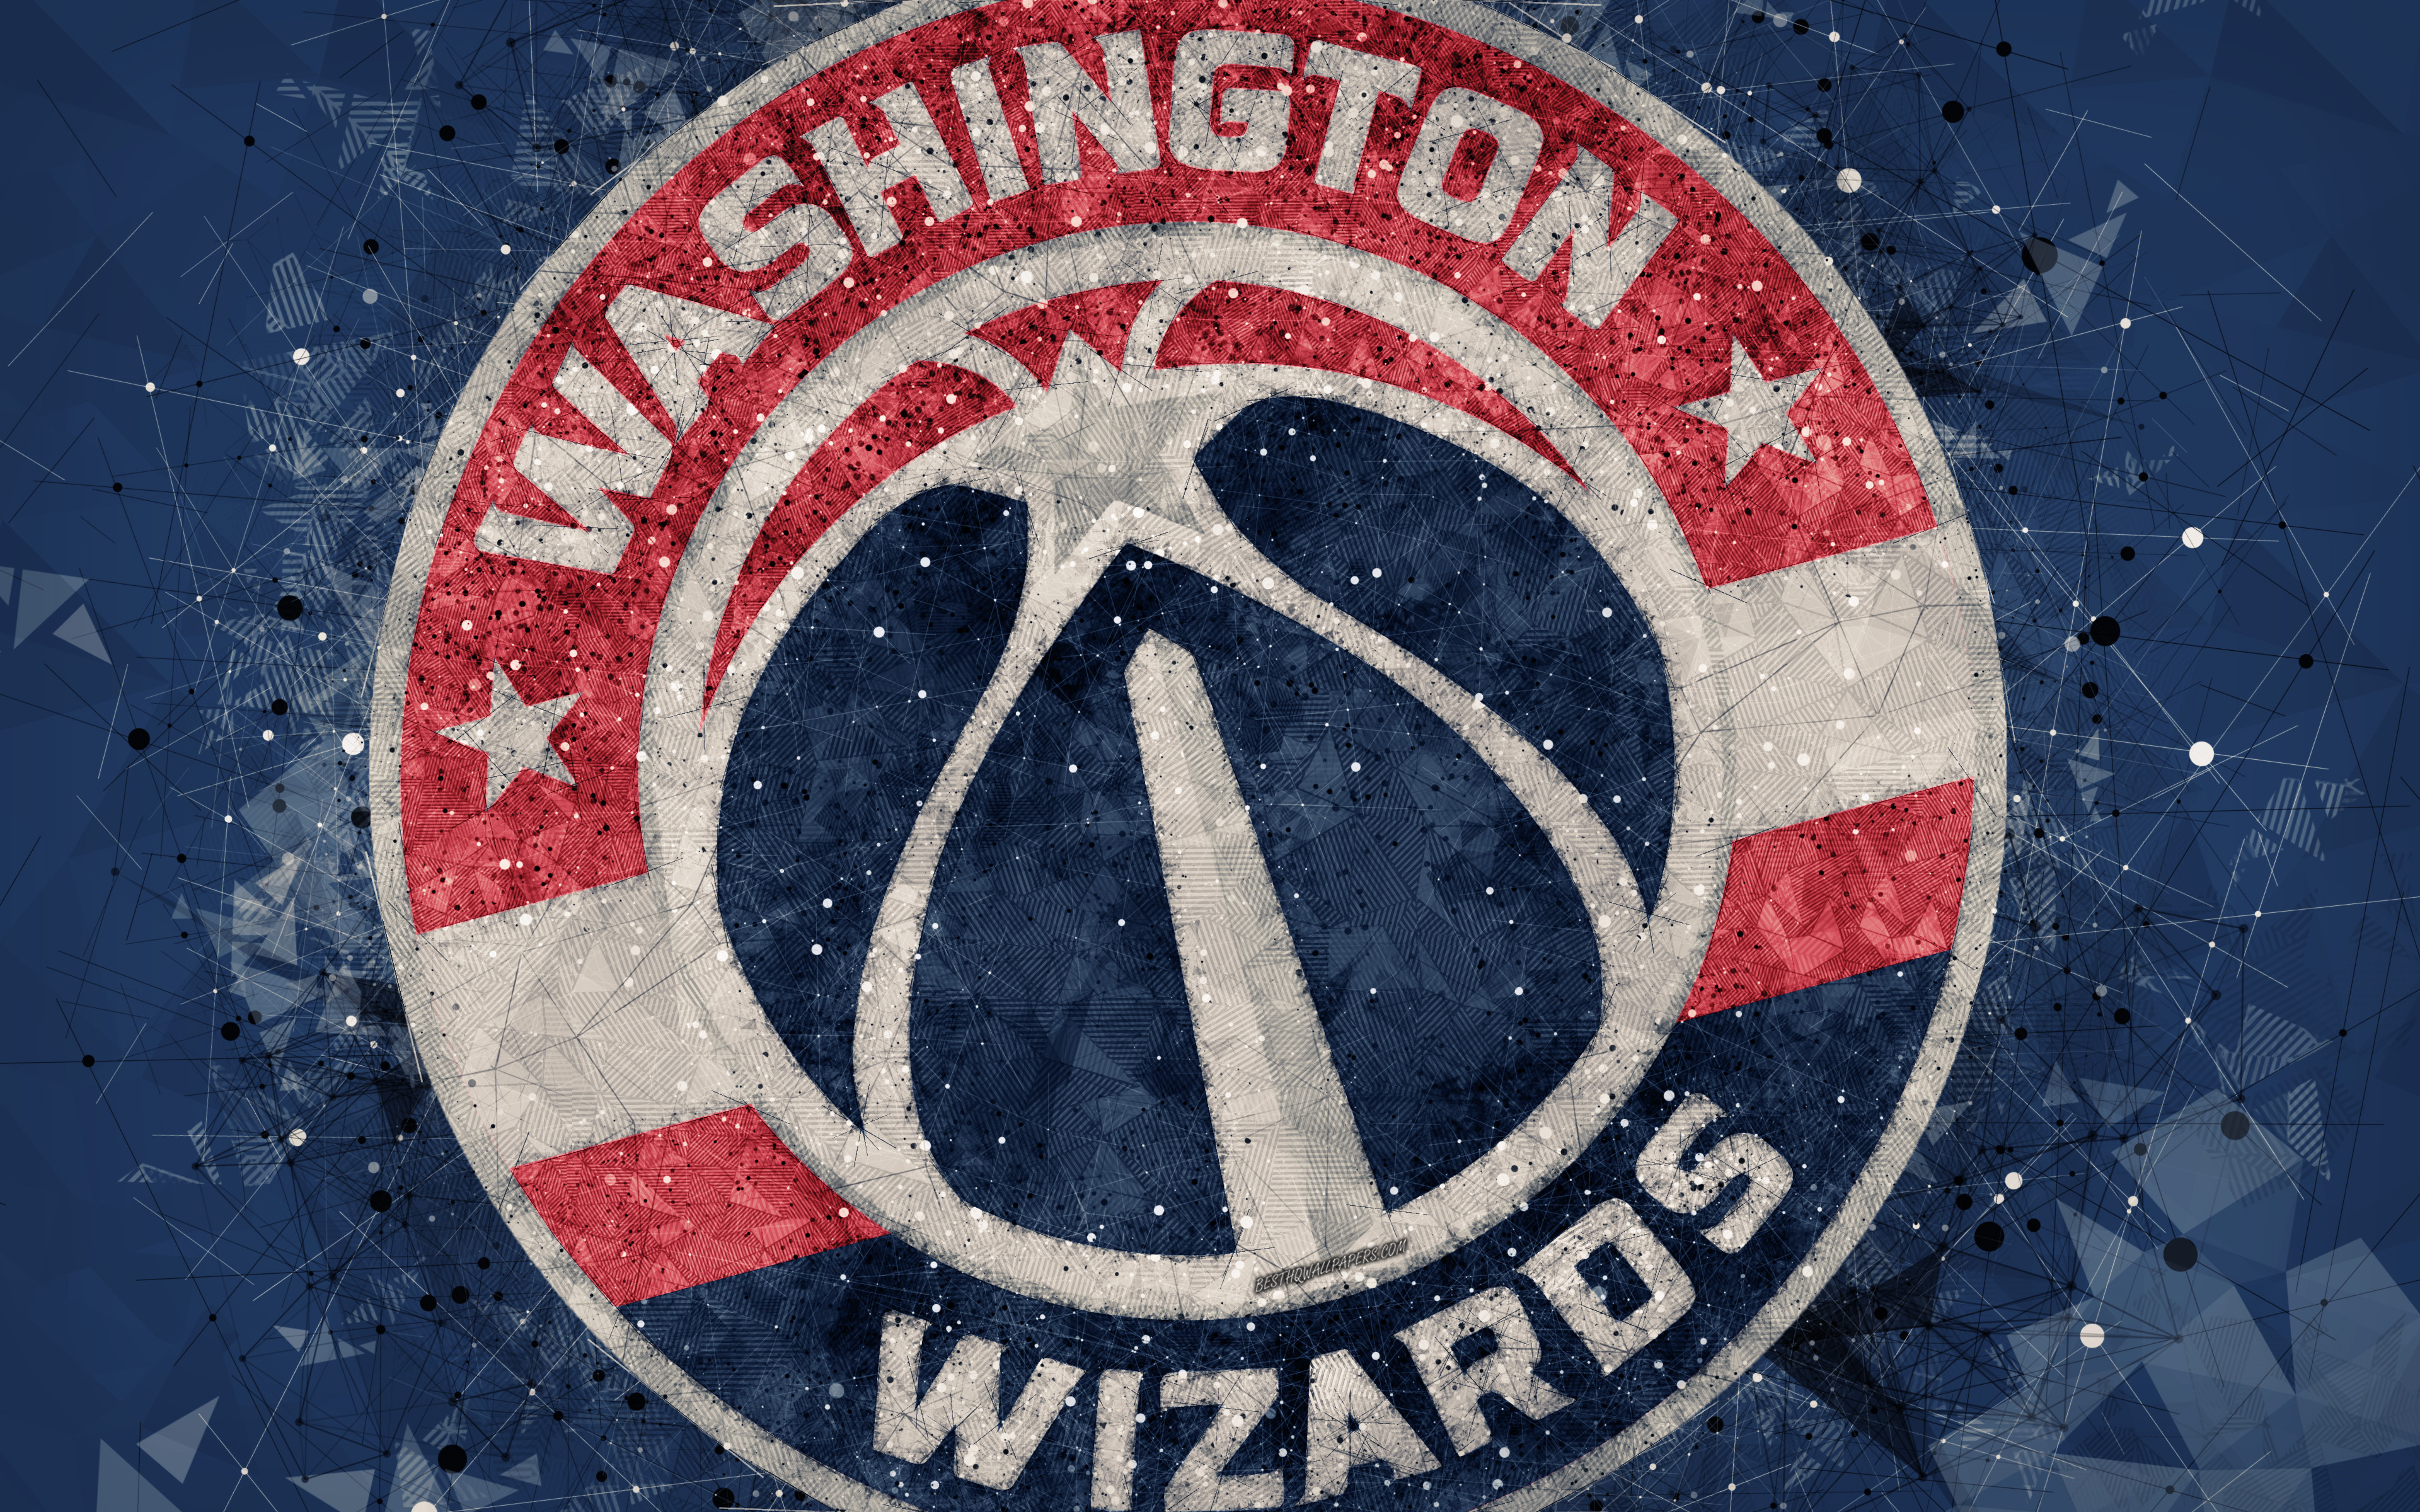 Washington Wizards Wallpaper Hd - St Augustine College Of Education , HD Wallpaper & Backgrounds